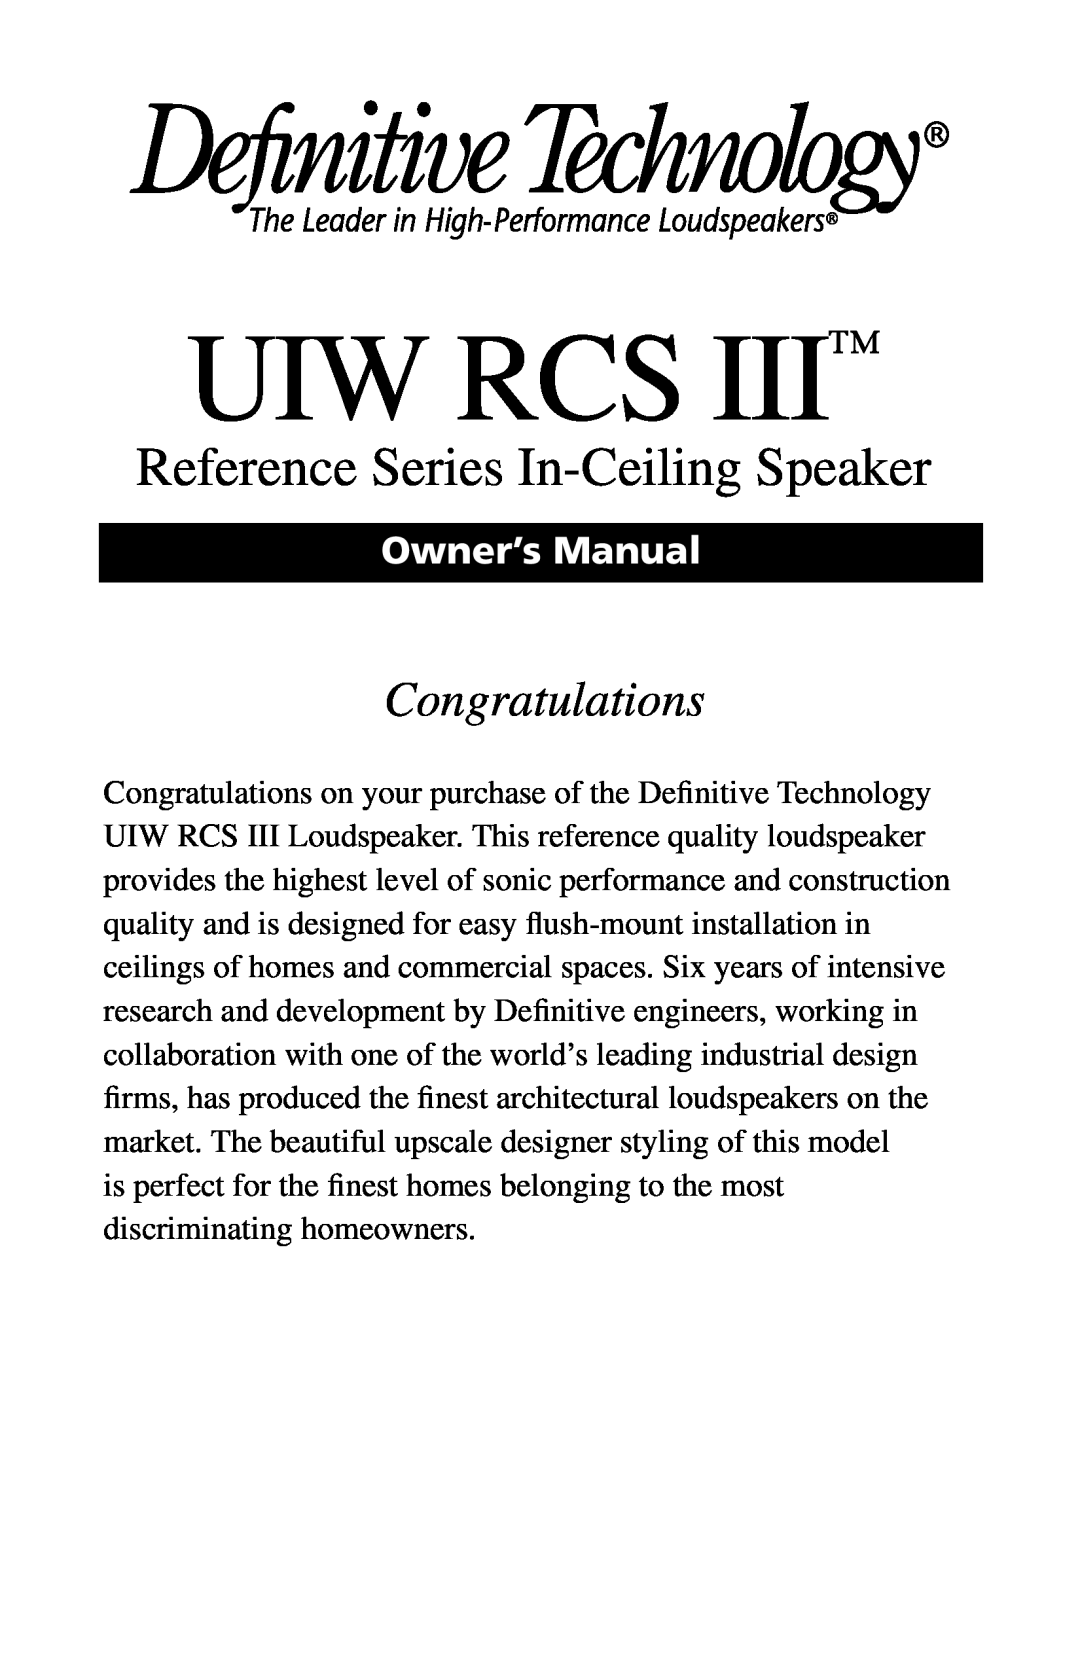 Definitive Technology Reference Series In-Ceiling Speaker owner manual Uiw Rcs, Reference Series In-CeilingSpeaker 